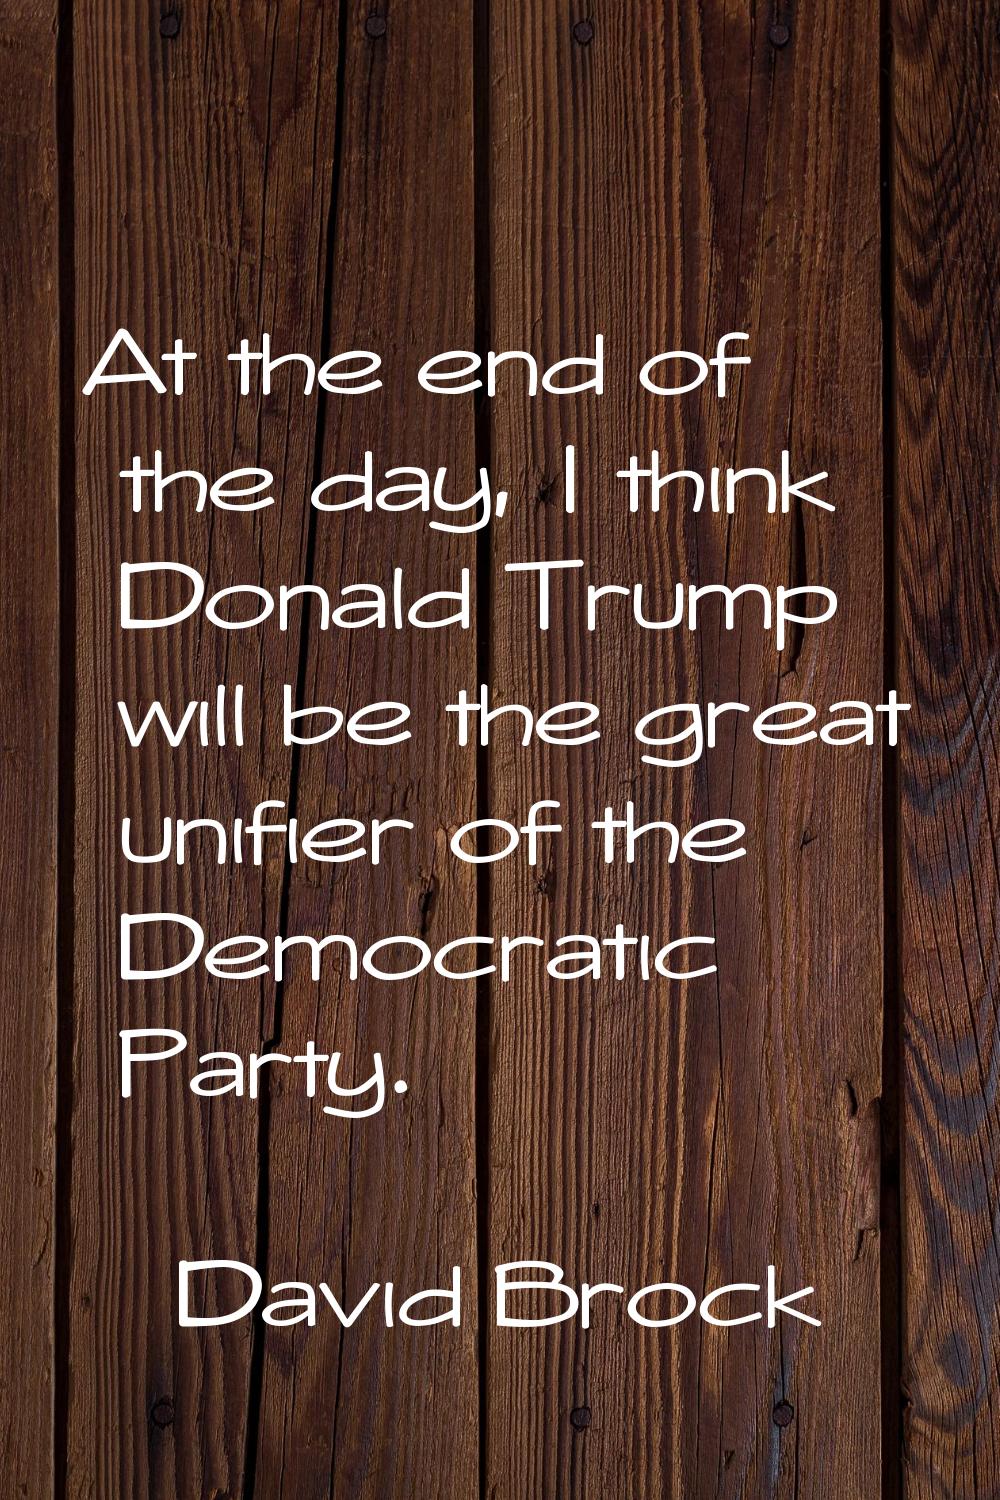 At the end of the day, I think Donald Trump will be the great unifier of the Democratic Party.